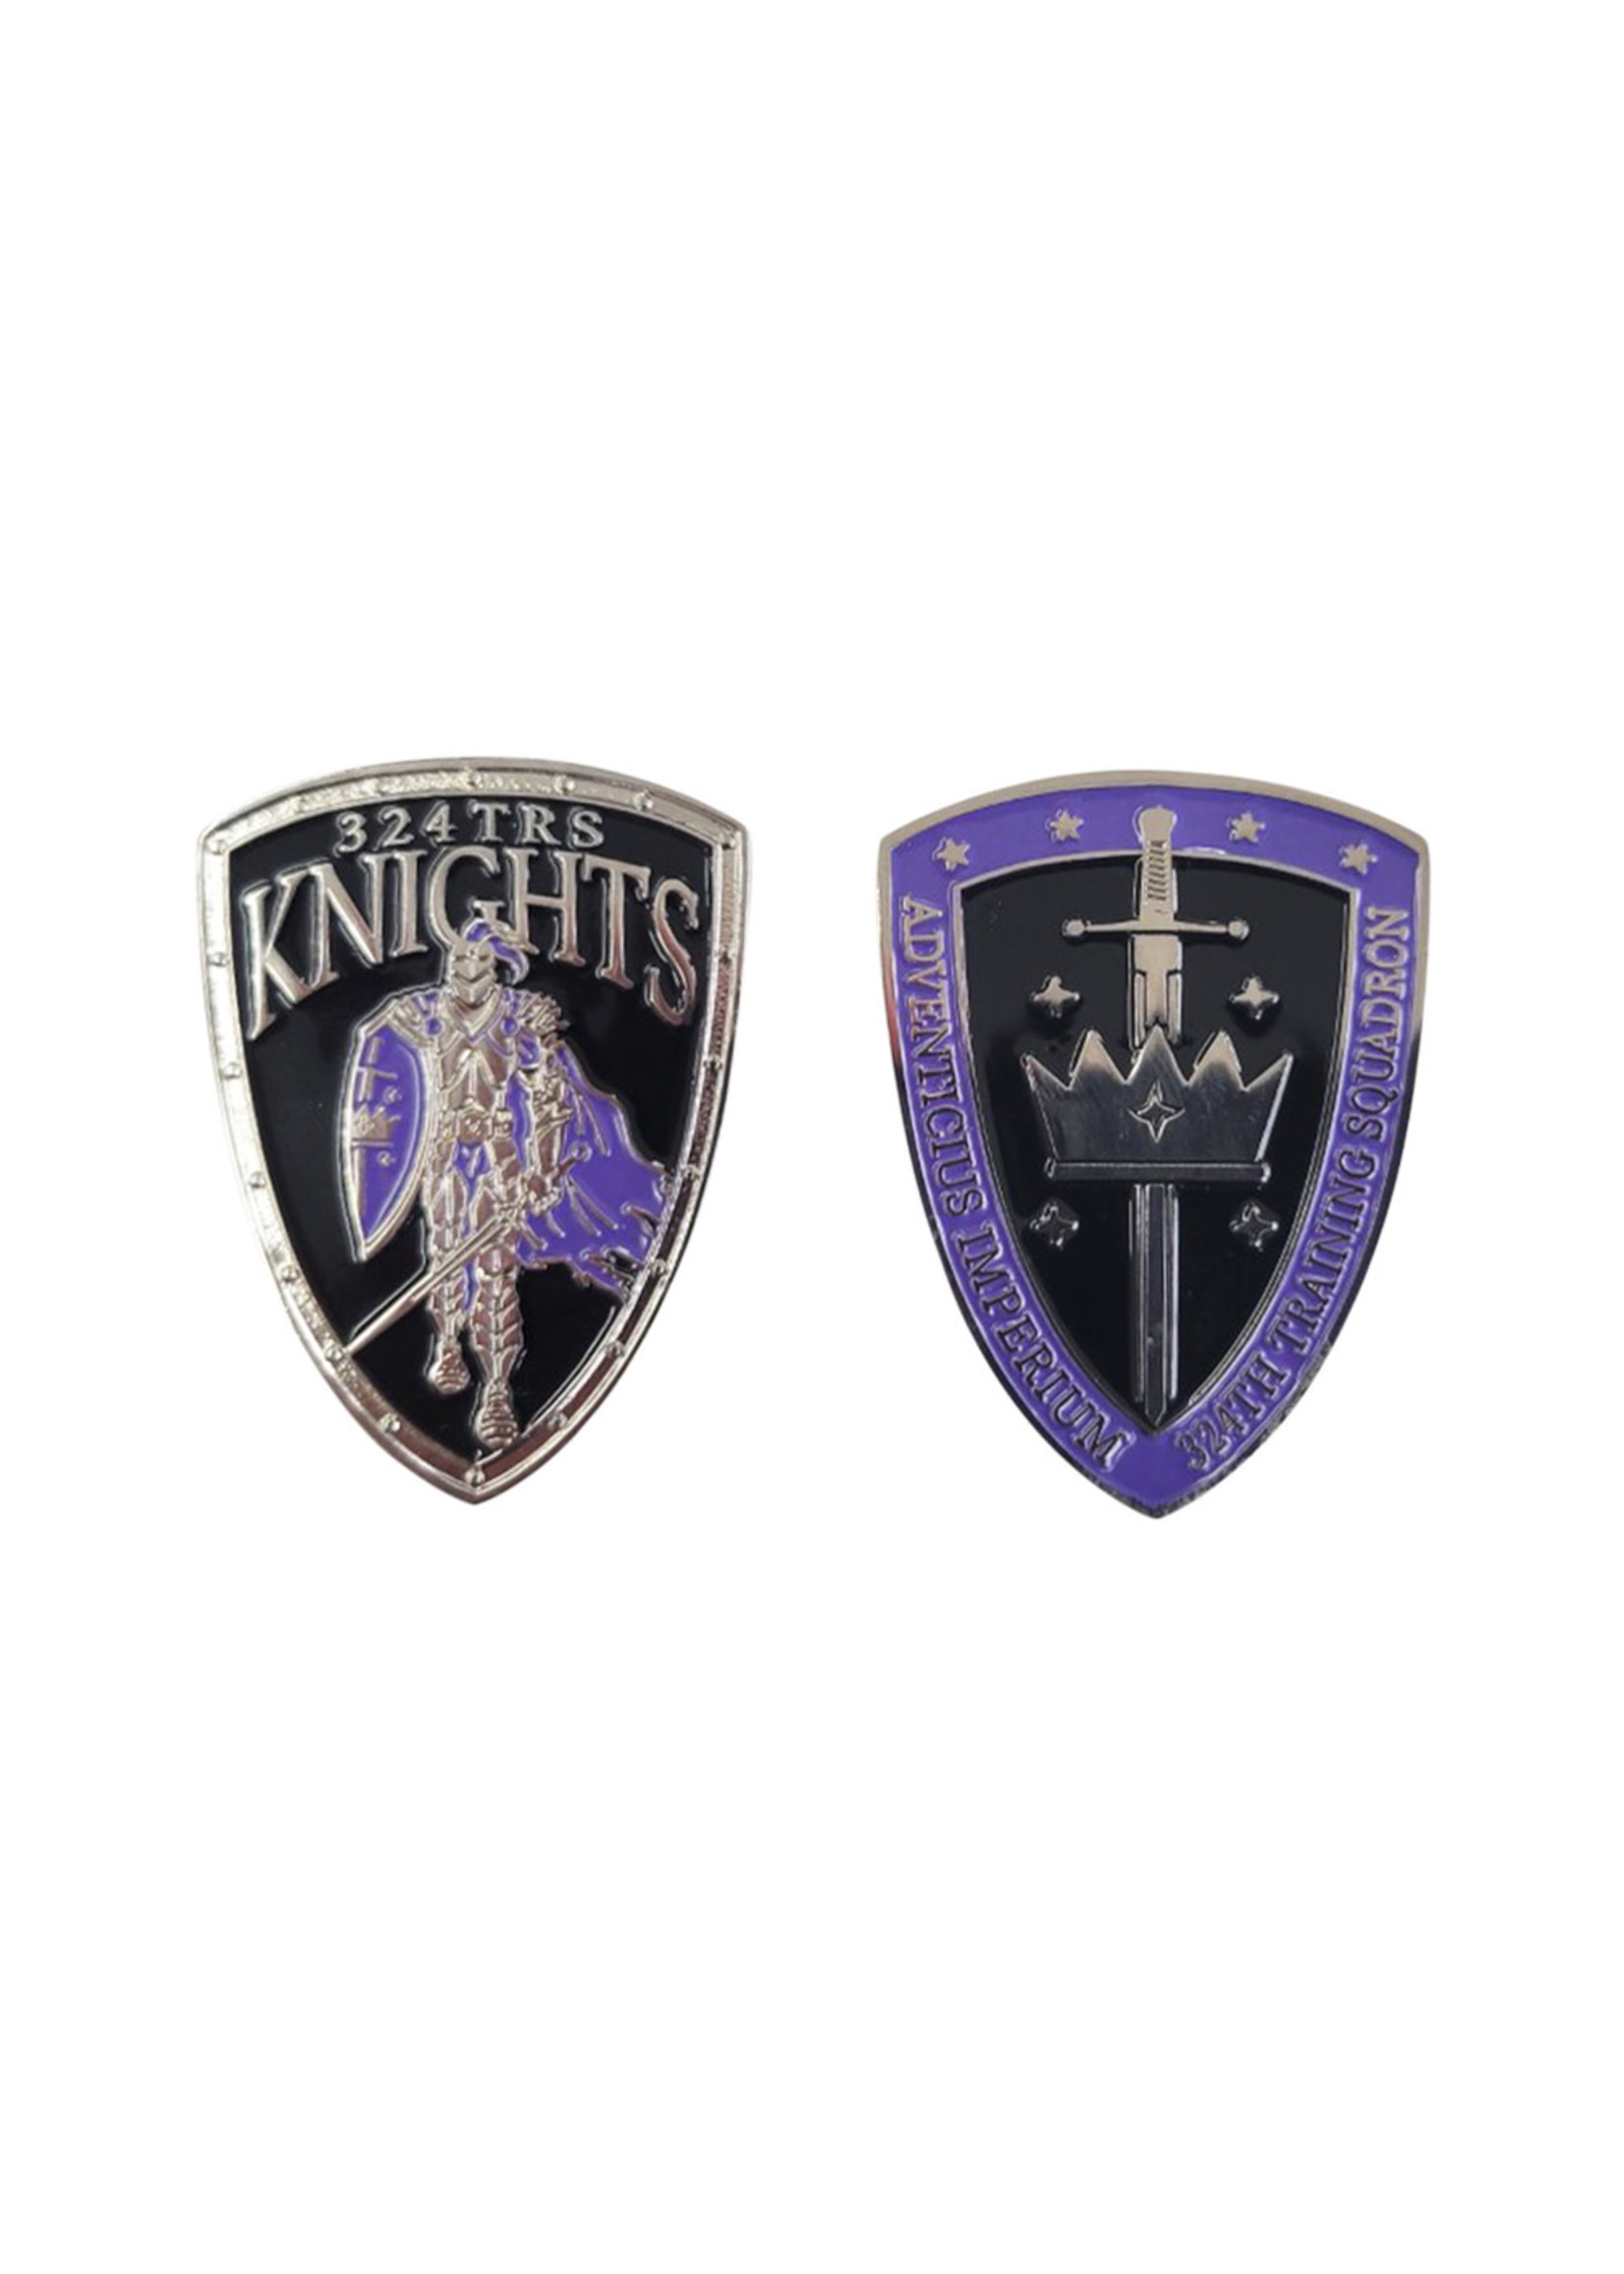 324th Knights Squadron Challenge Coin